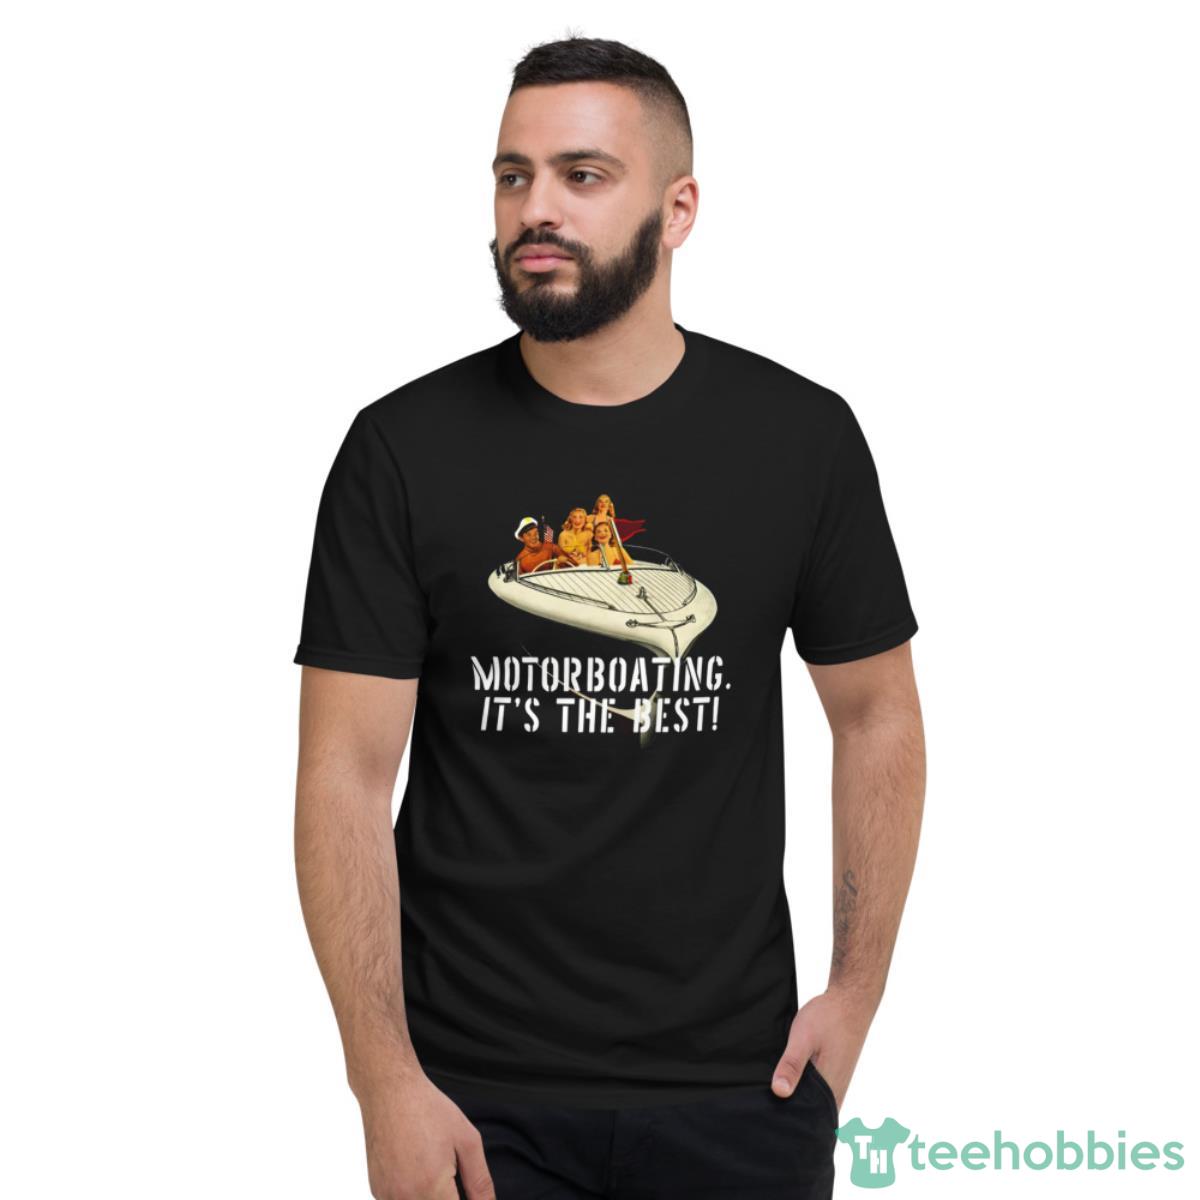 Motorboating It’s The Best Shirt - Short Sleeve T-Shirt